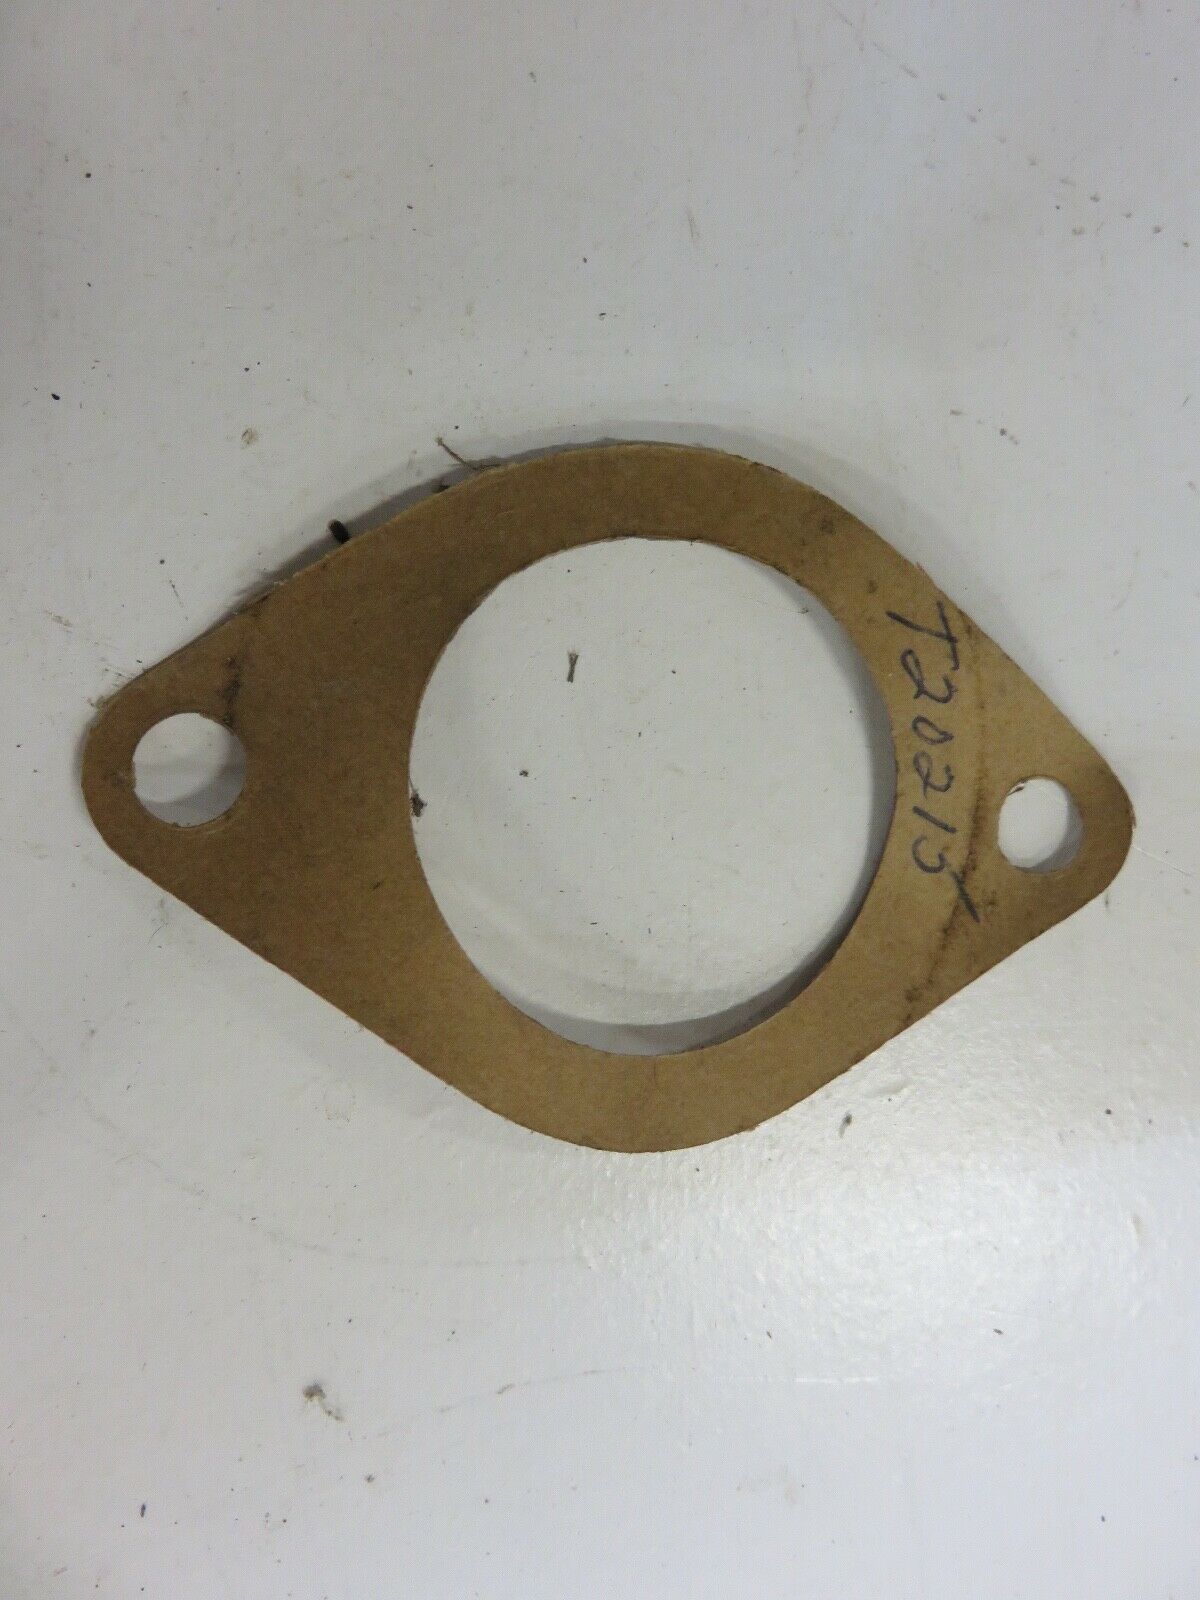 T20215 John Deere NOS Thermostat Cover Gasket For 1020, 1120, 1030, 1130, 1630, 1520